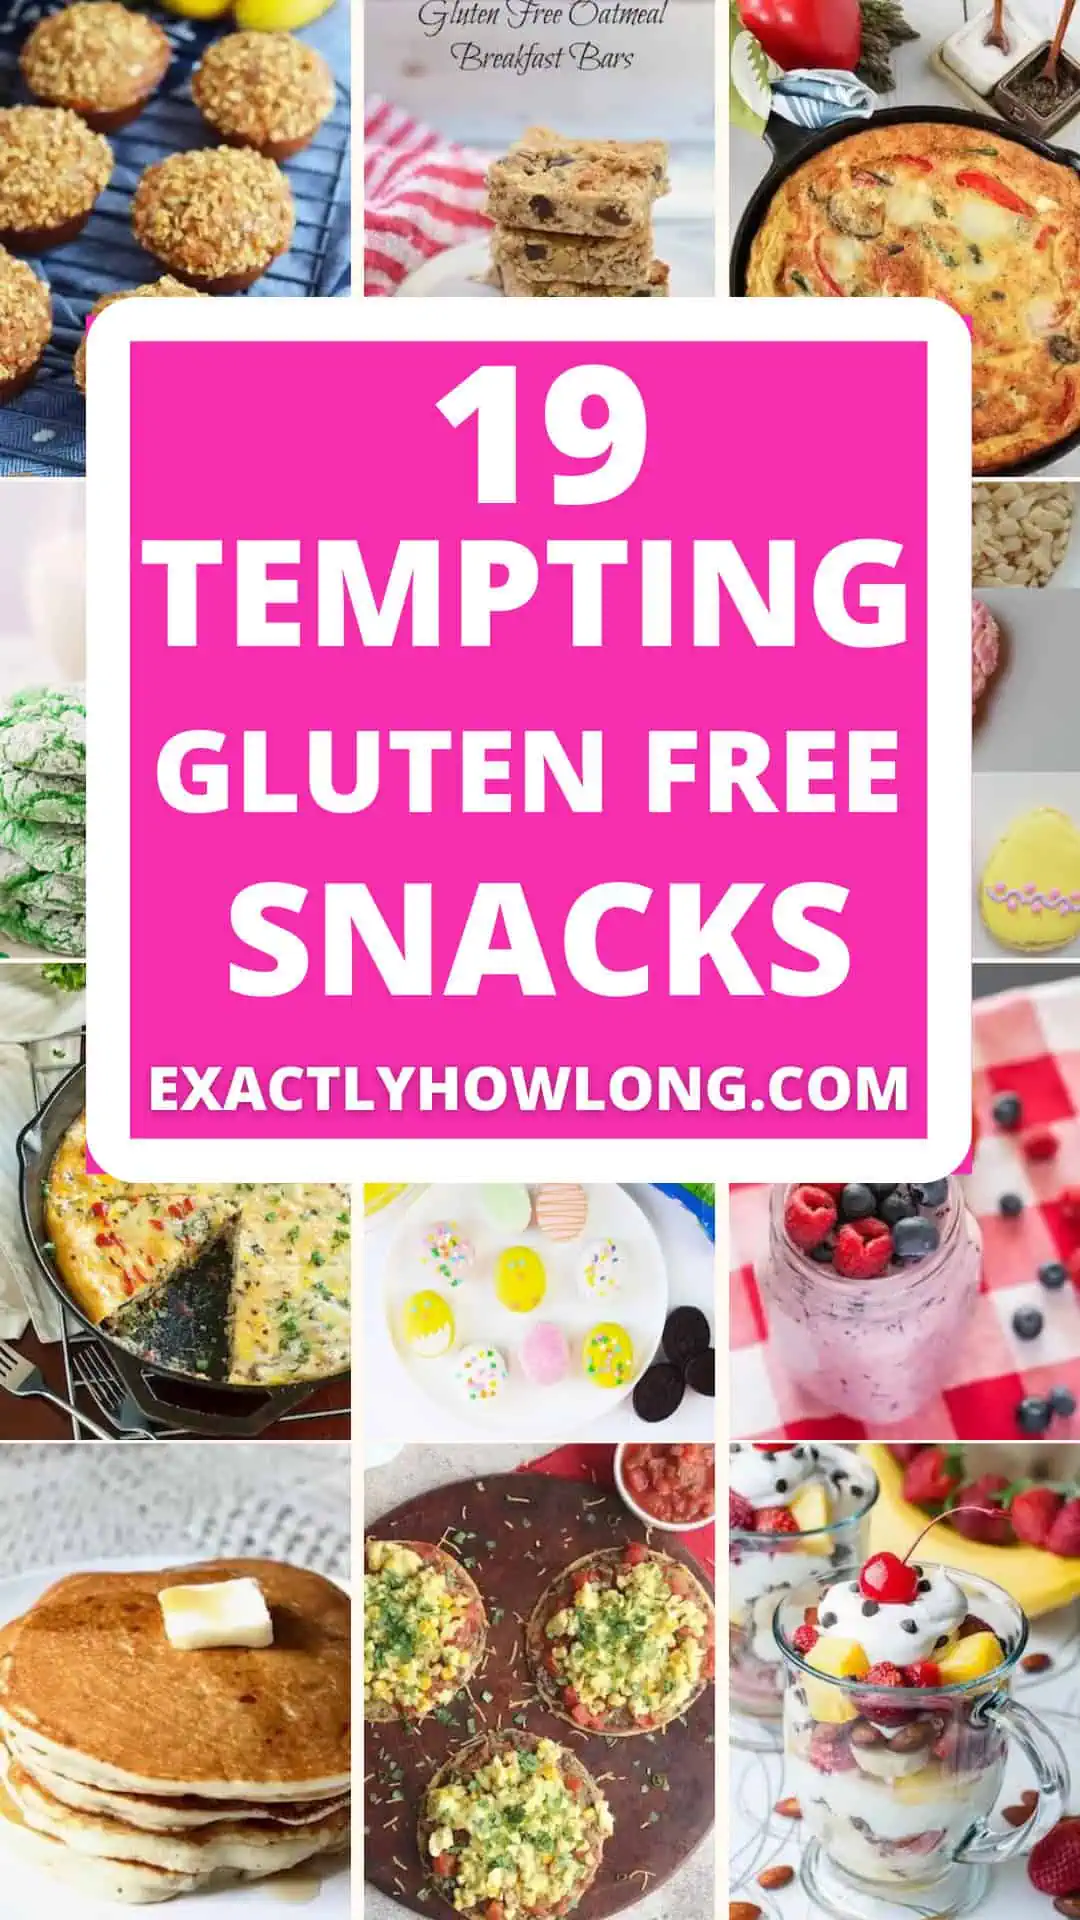 Convenient weight loss snacks that are both nutritious and gluten-free